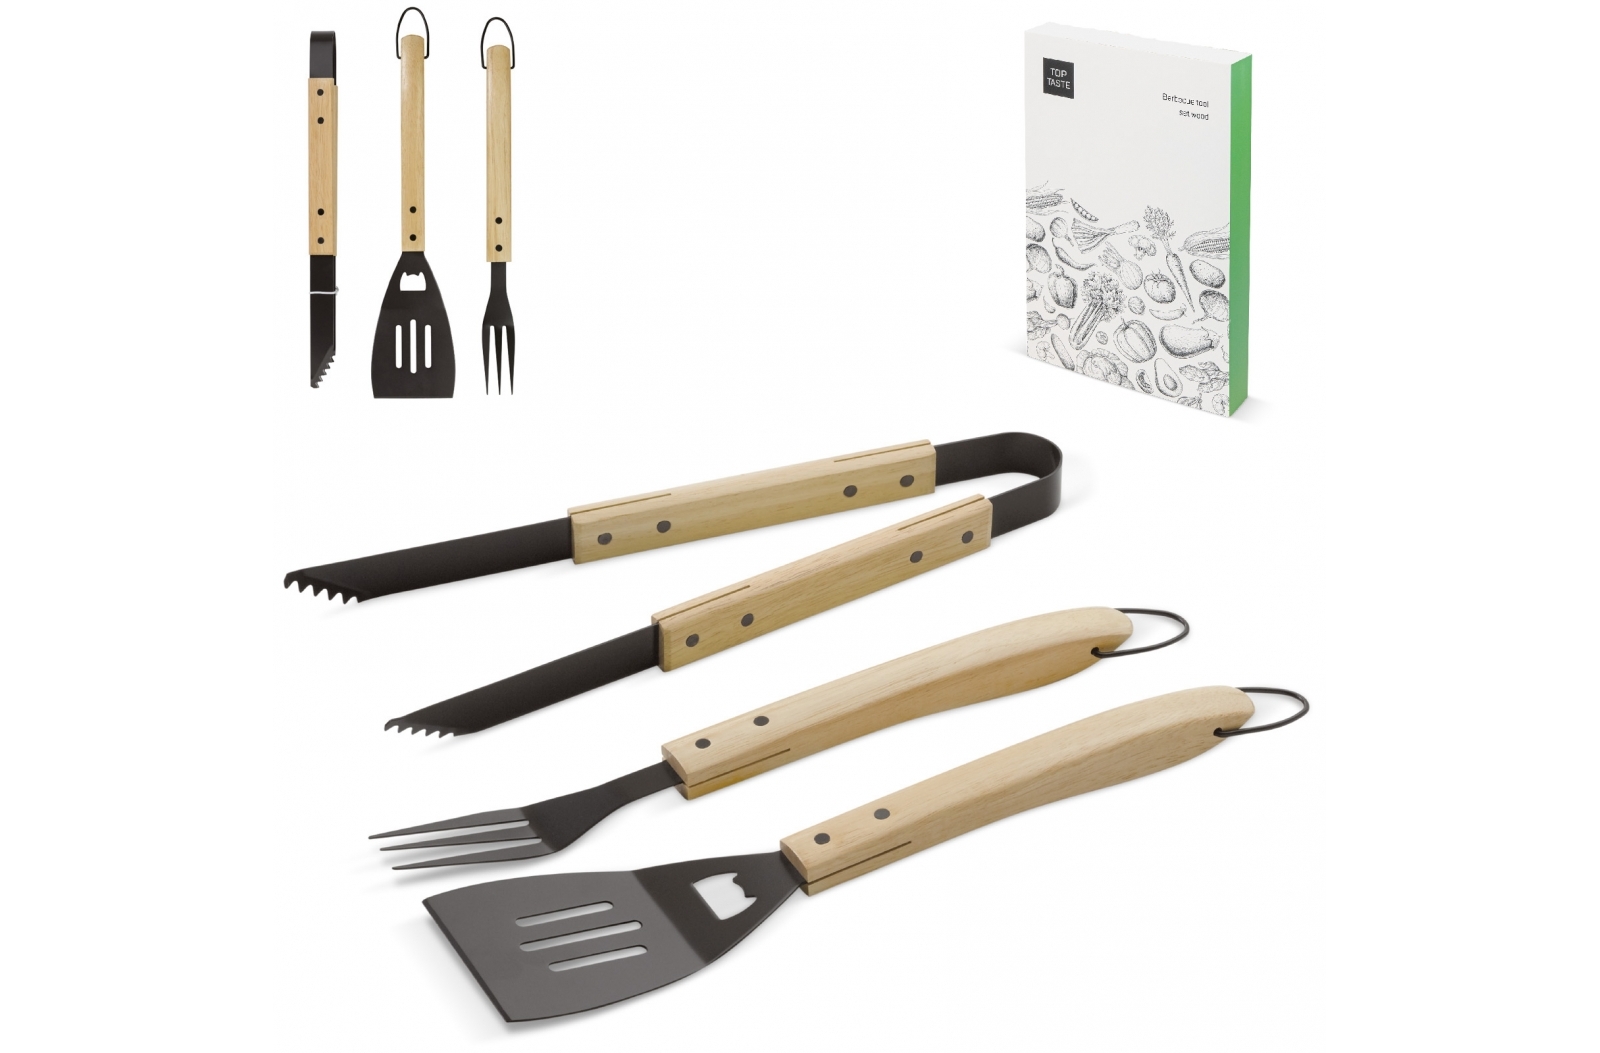 Three-Piece Metal Barbecue Tool Set with Wooden Handles - Yardley Wood